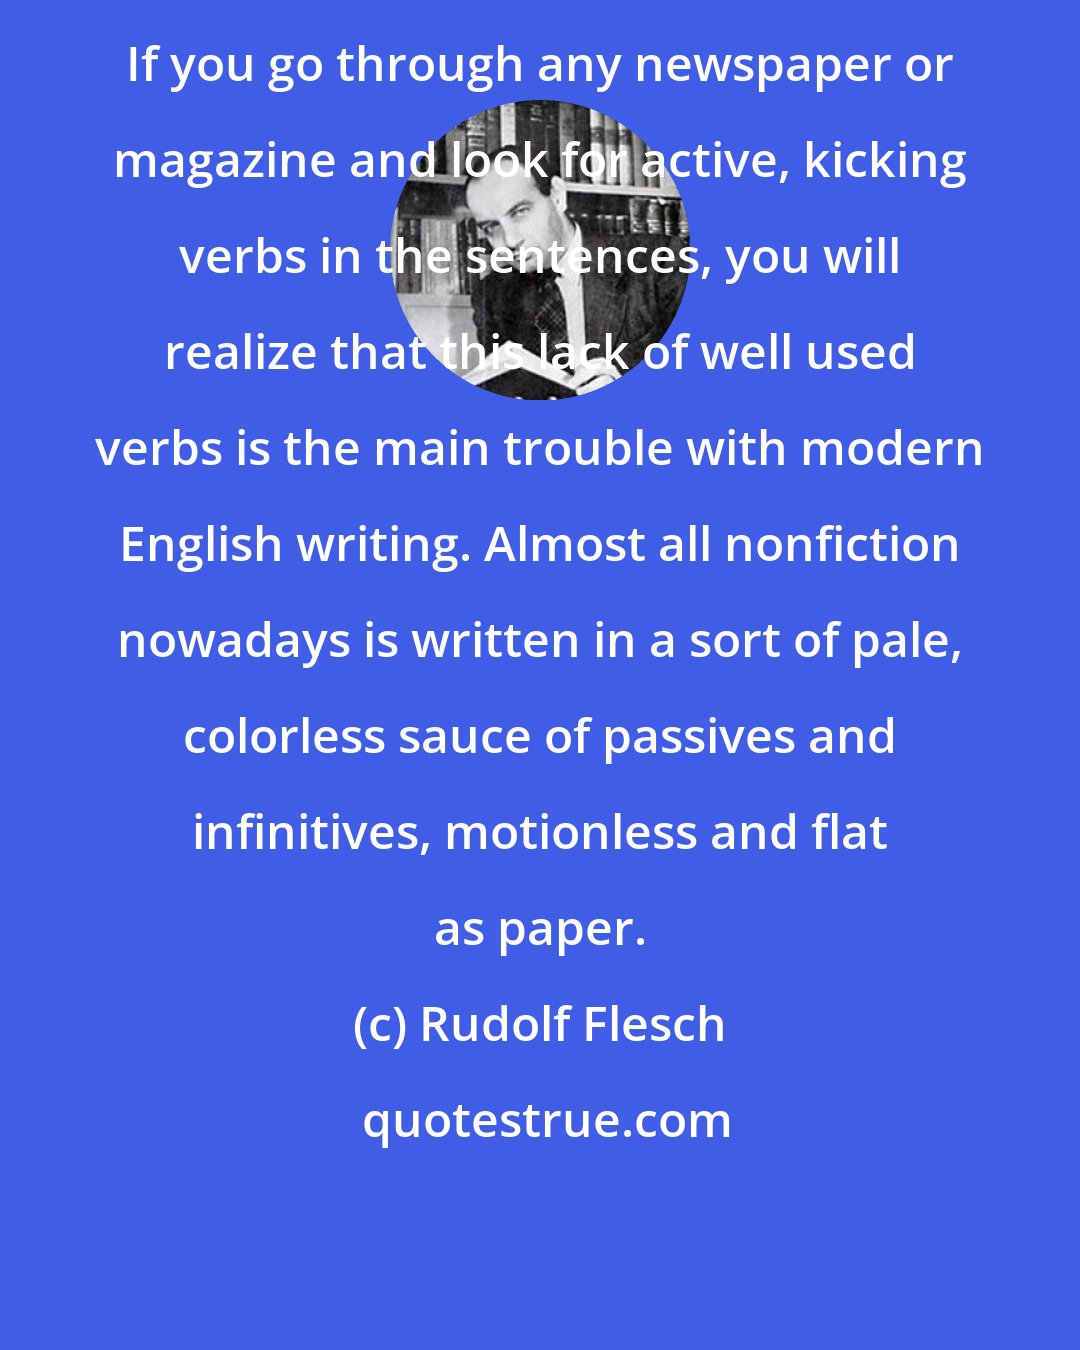 Rudolf Flesch: If you go through any newspaper or magazine and look for active, kicking verbs in the sentences, you will realize that this lack of well used verbs is the main trouble with modern English writing. Almost all nonfiction nowadays is written in a sort of pale, colorless sauce of passives and infinitives, motionless and flat as paper.